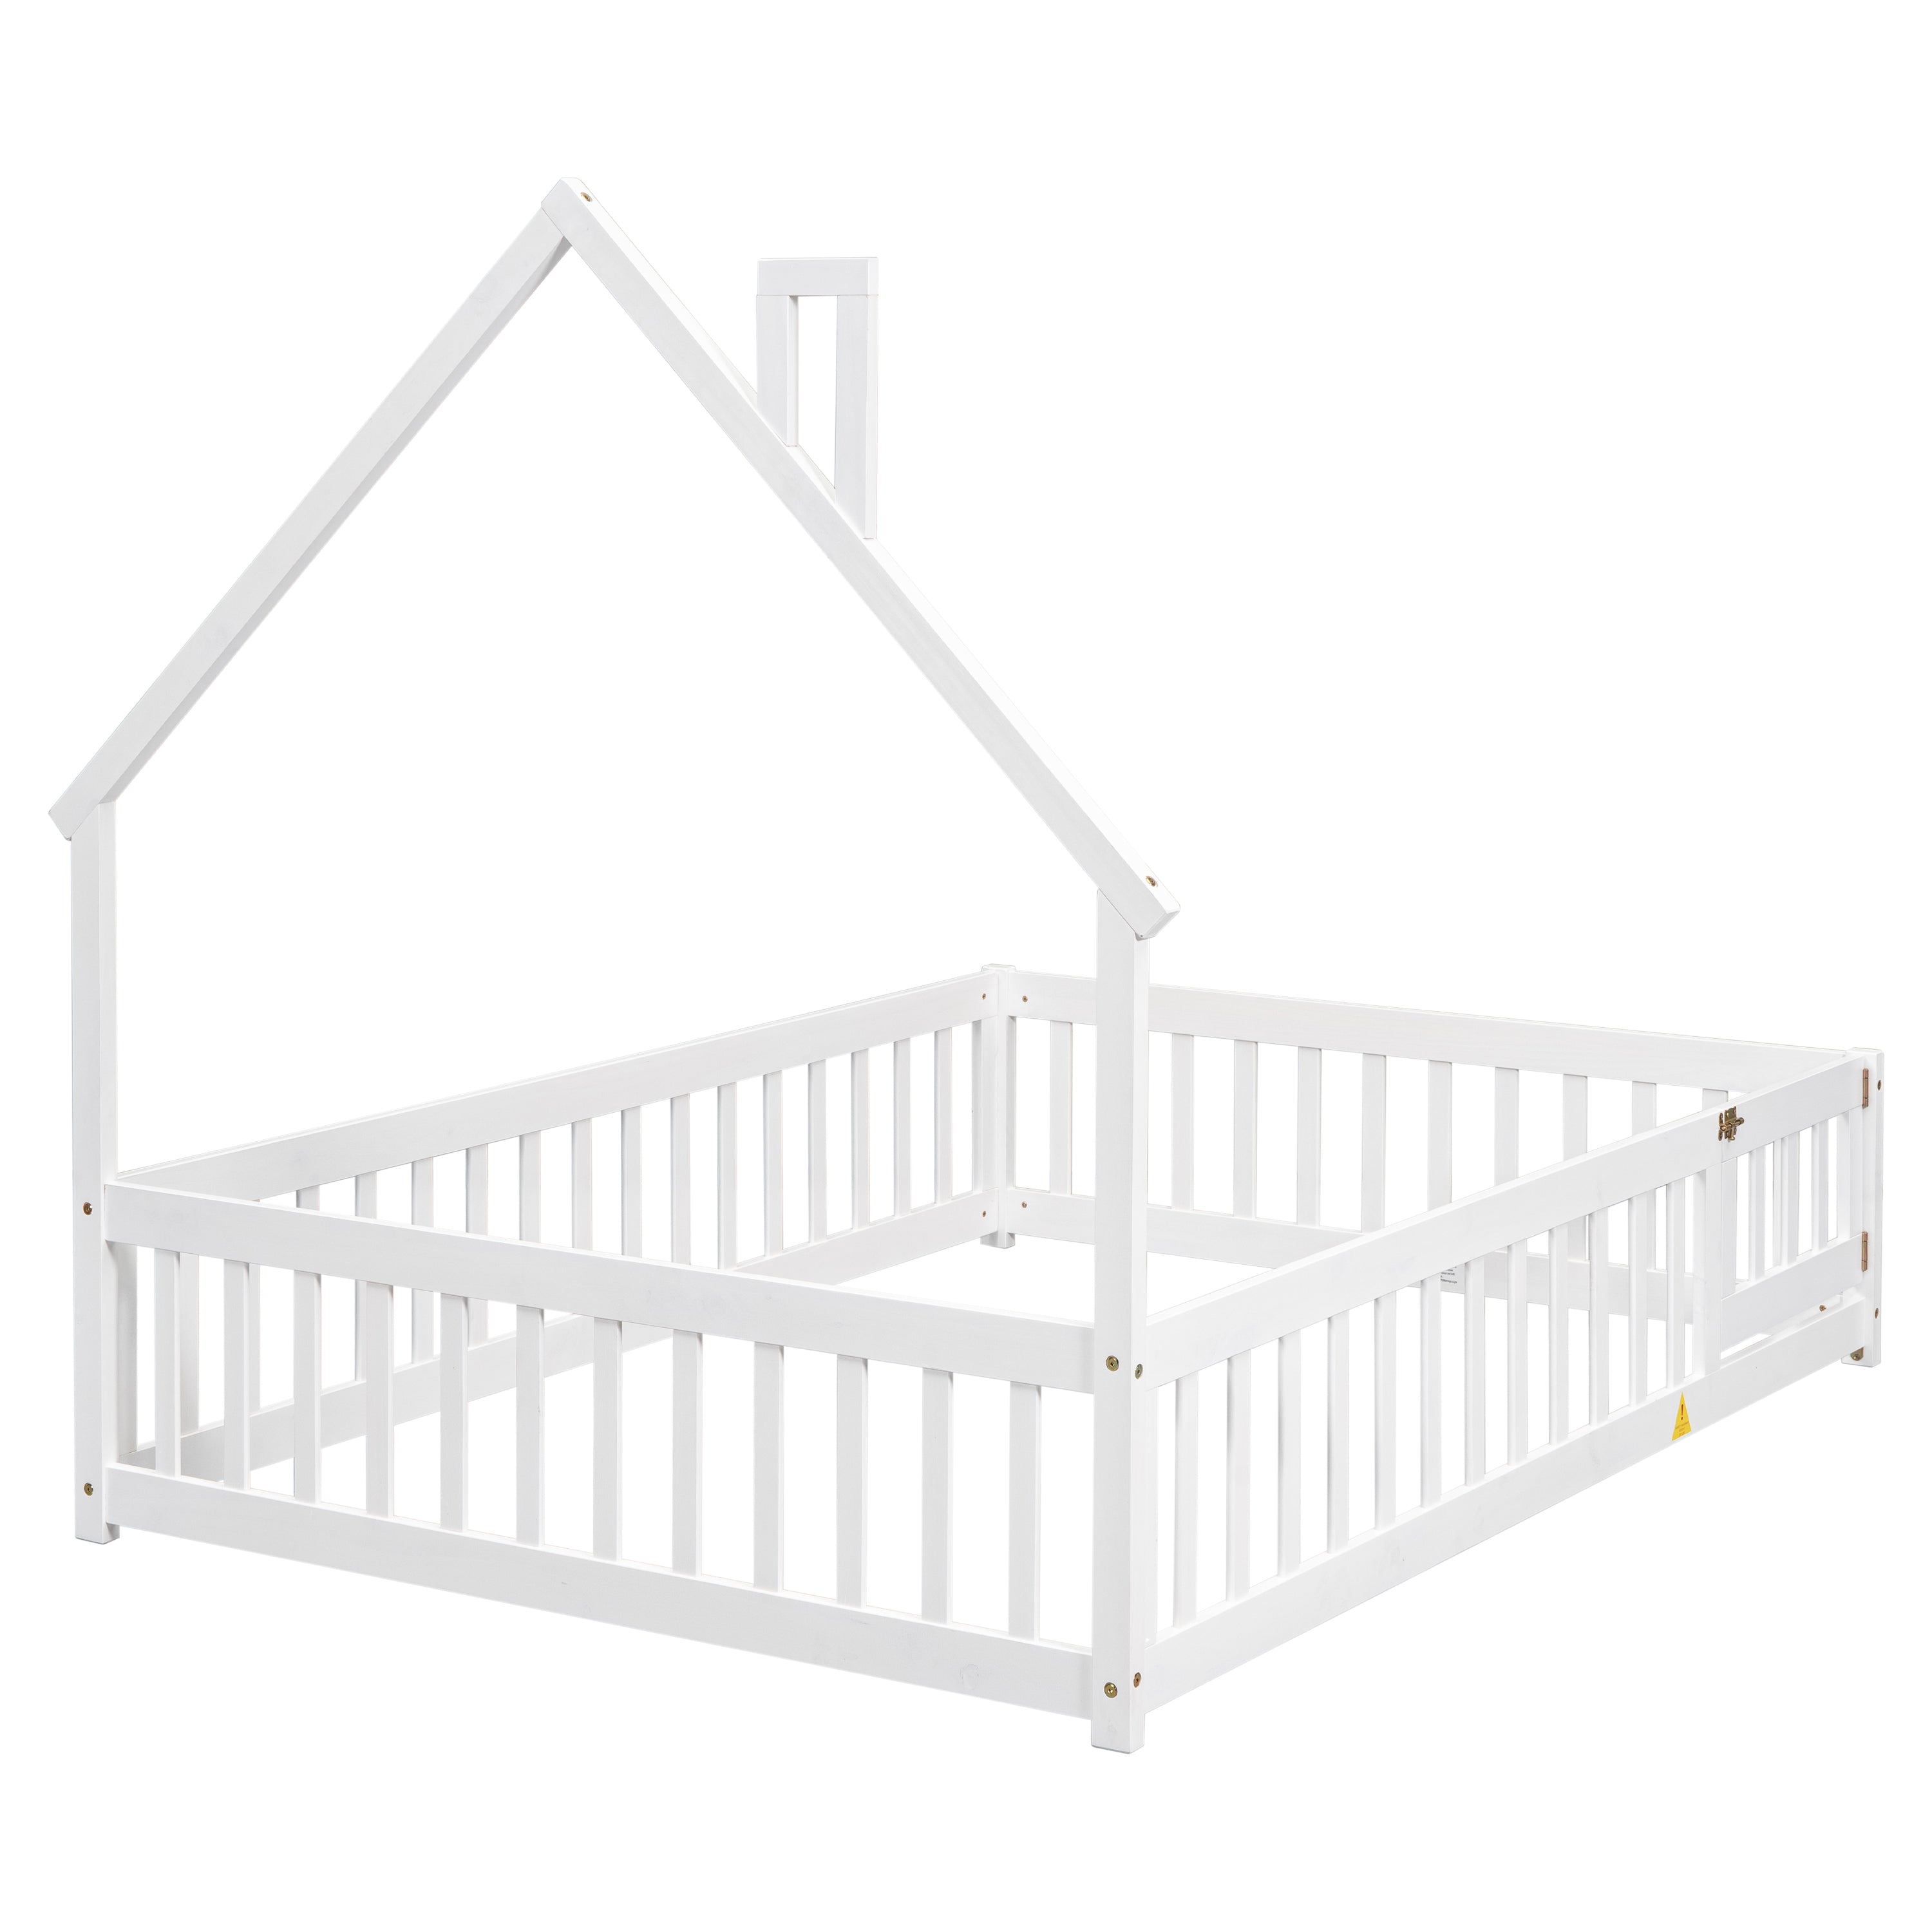 Full House-Shaped Headboard Floor Bed with Fence ,White